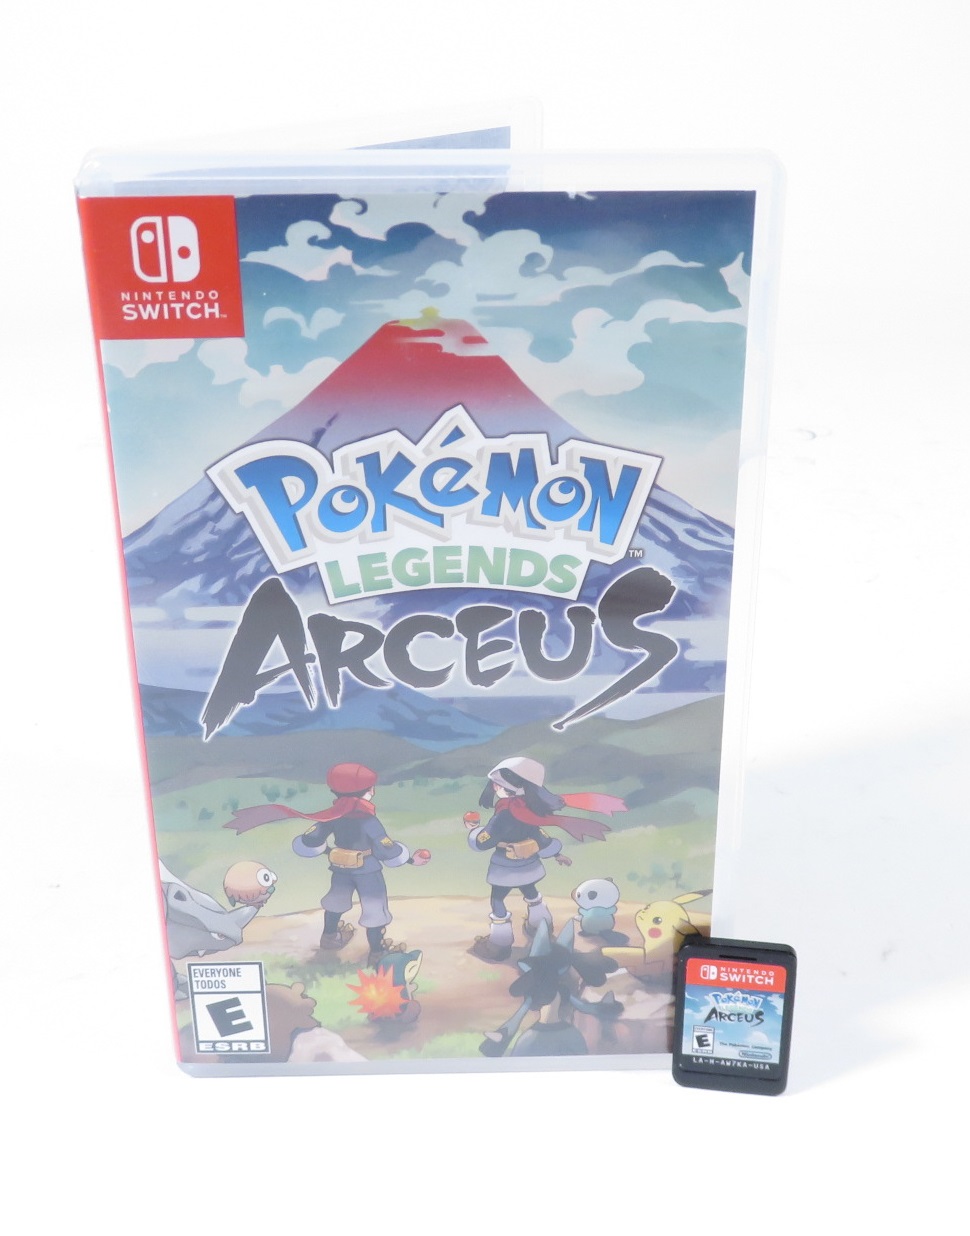 Pokemon Legends: Arceus Video Game for the Nintendo Switch